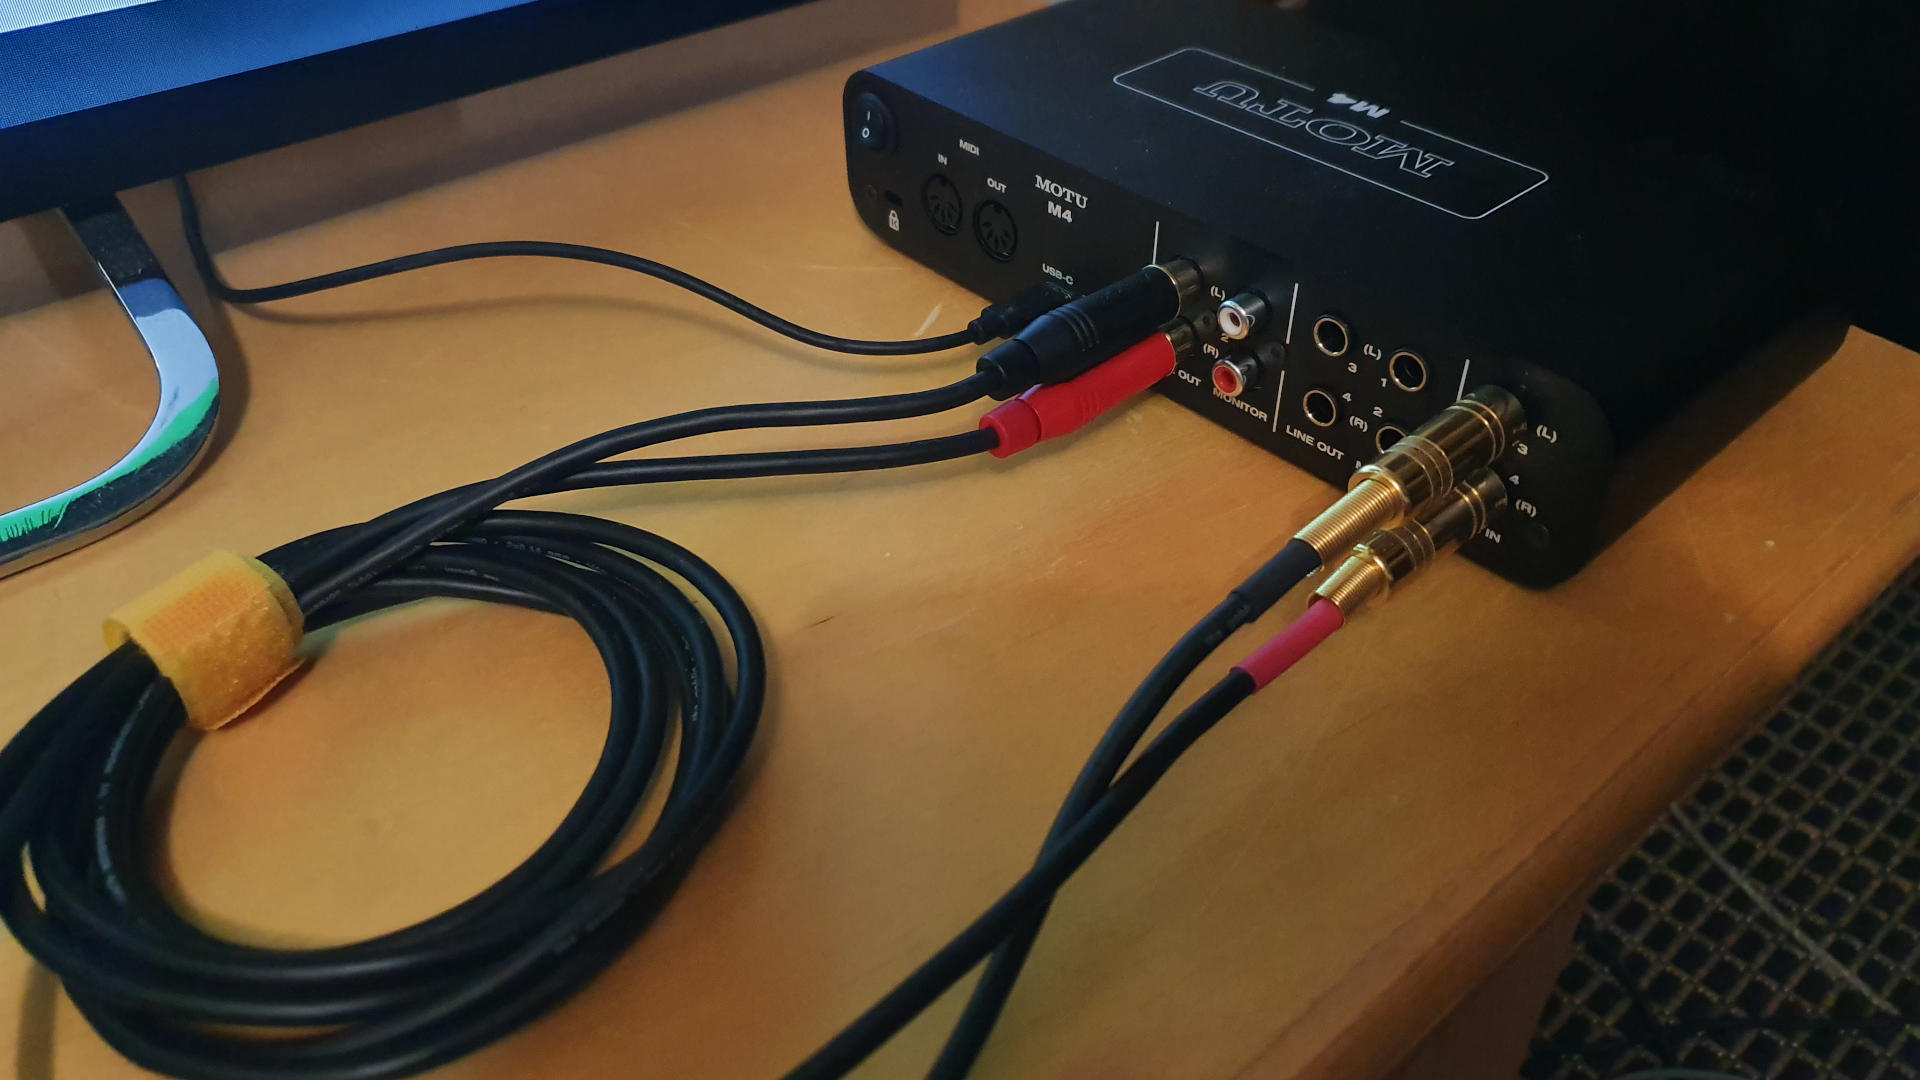 Motu M4 review: With measurements and Linux notes